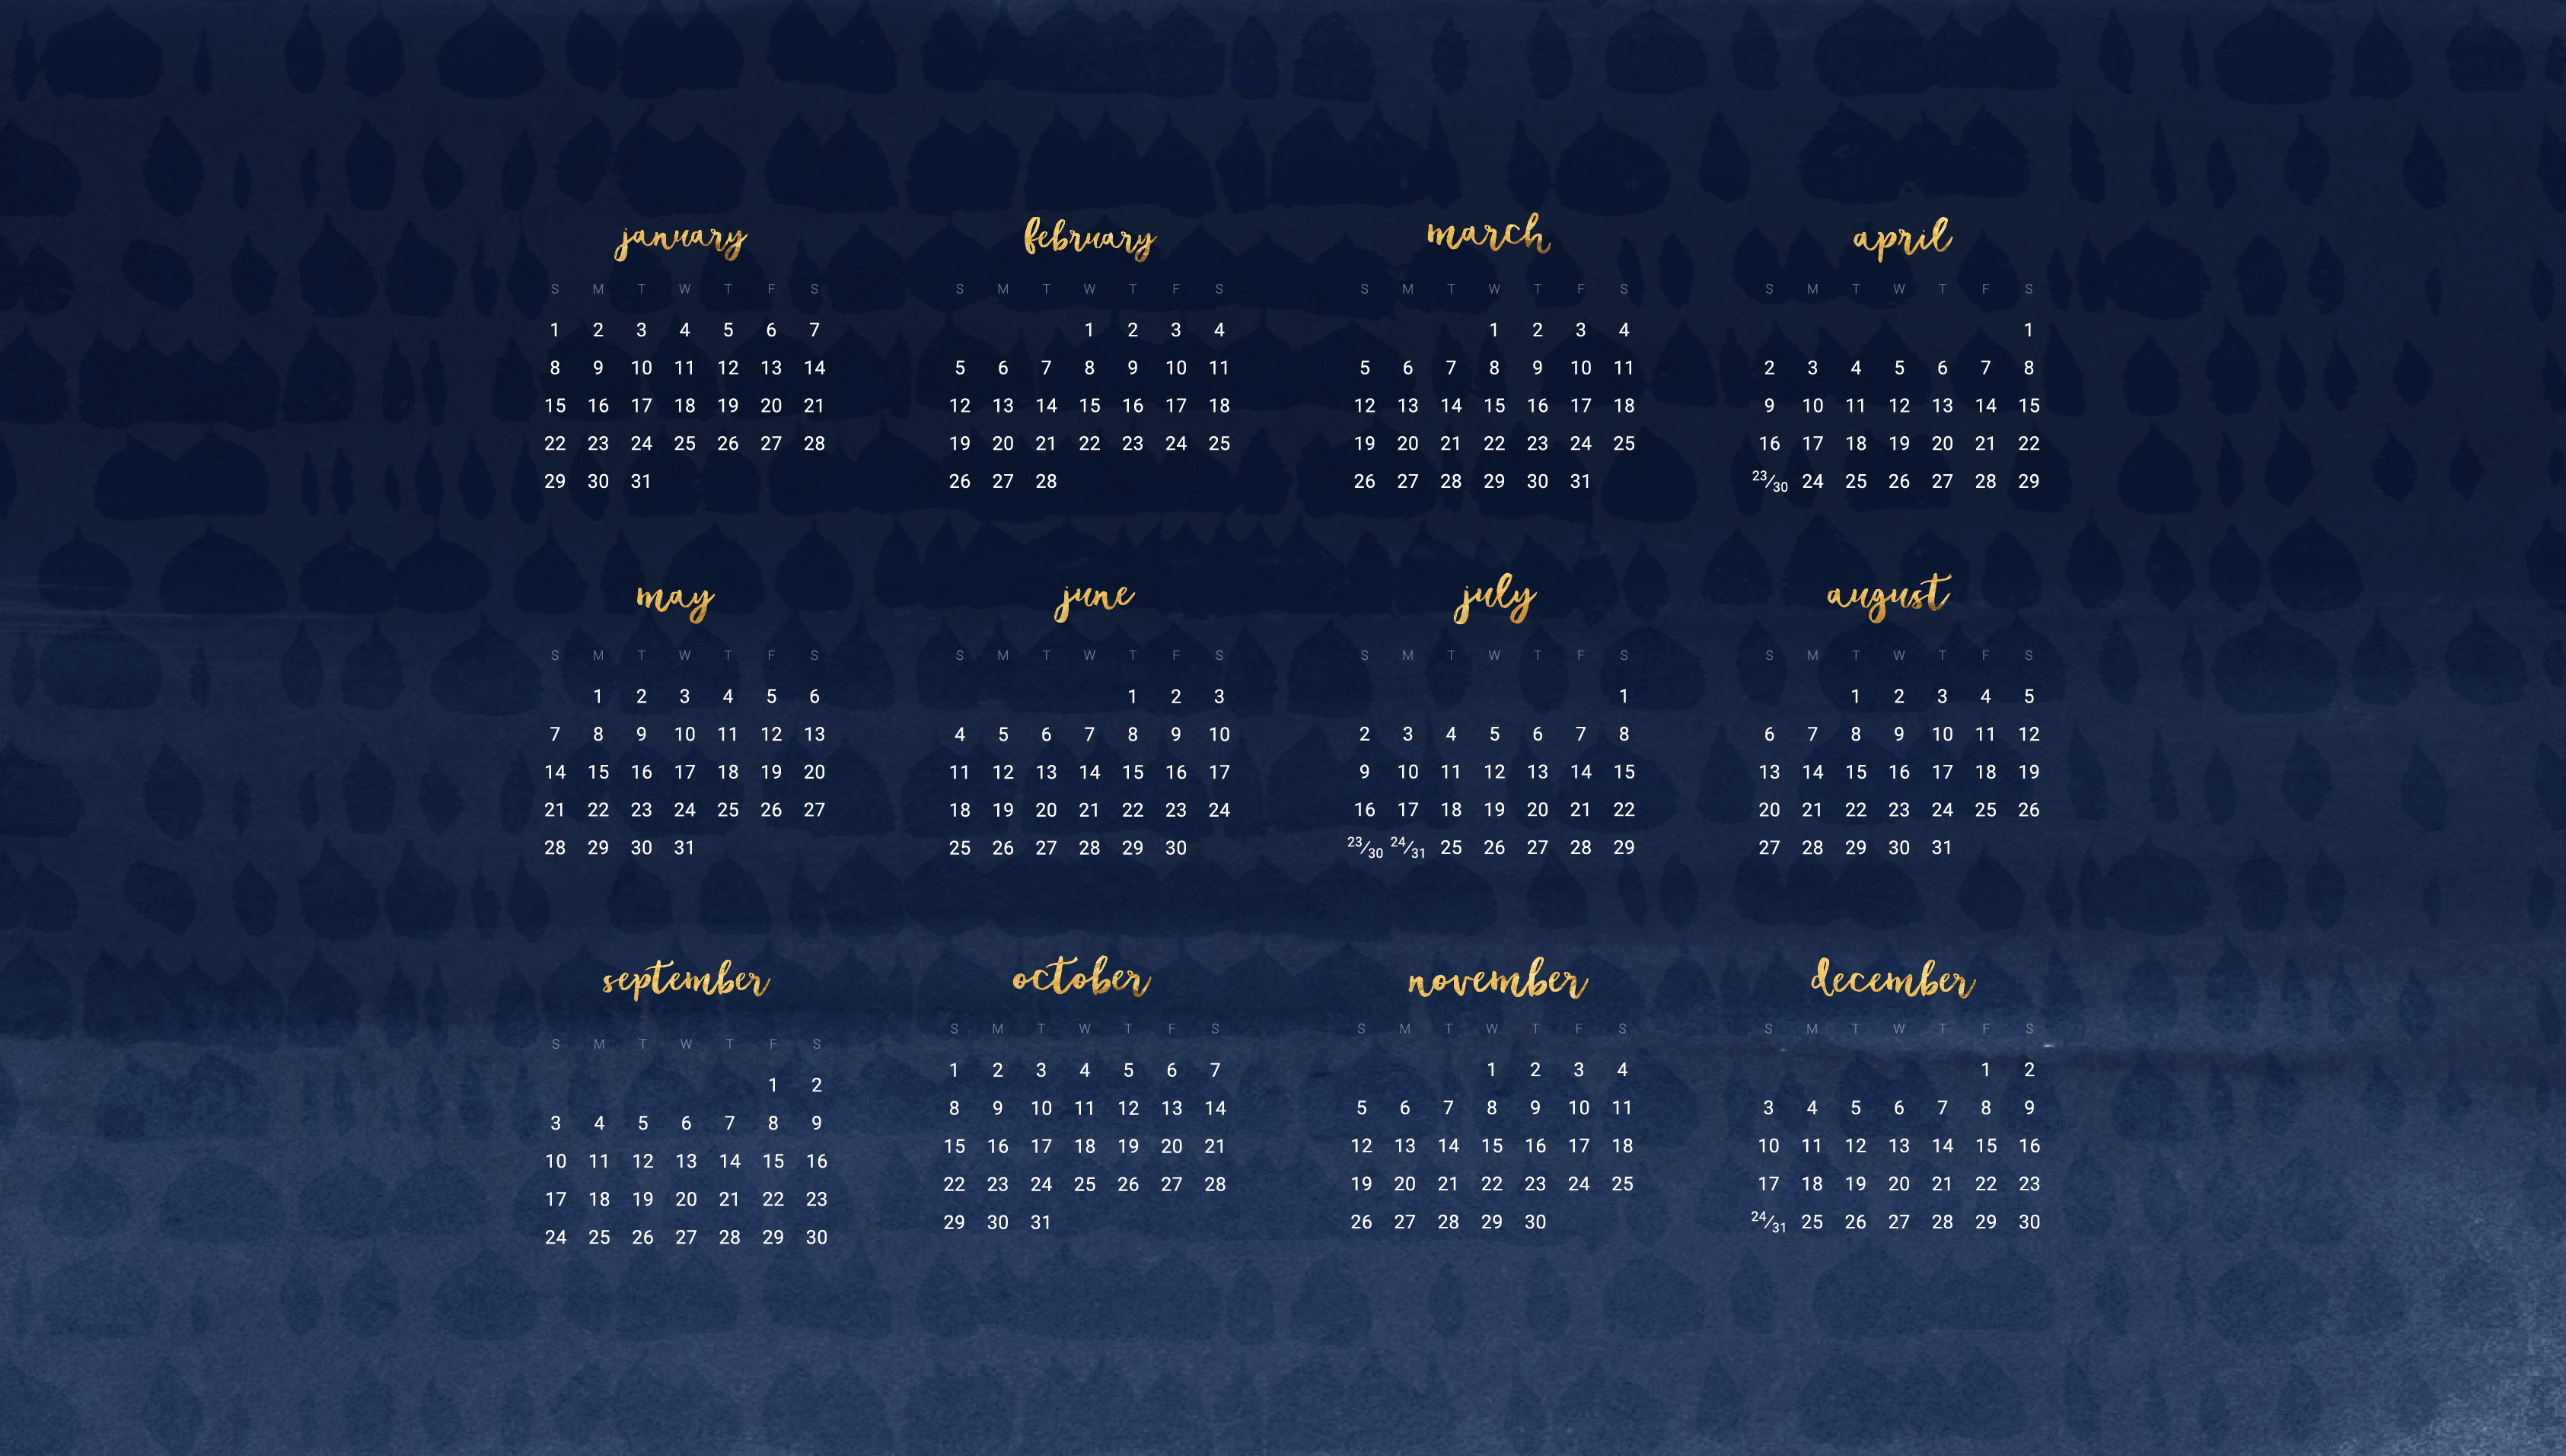 Wallpaper Calendars for 2018 61 images 3371x1913